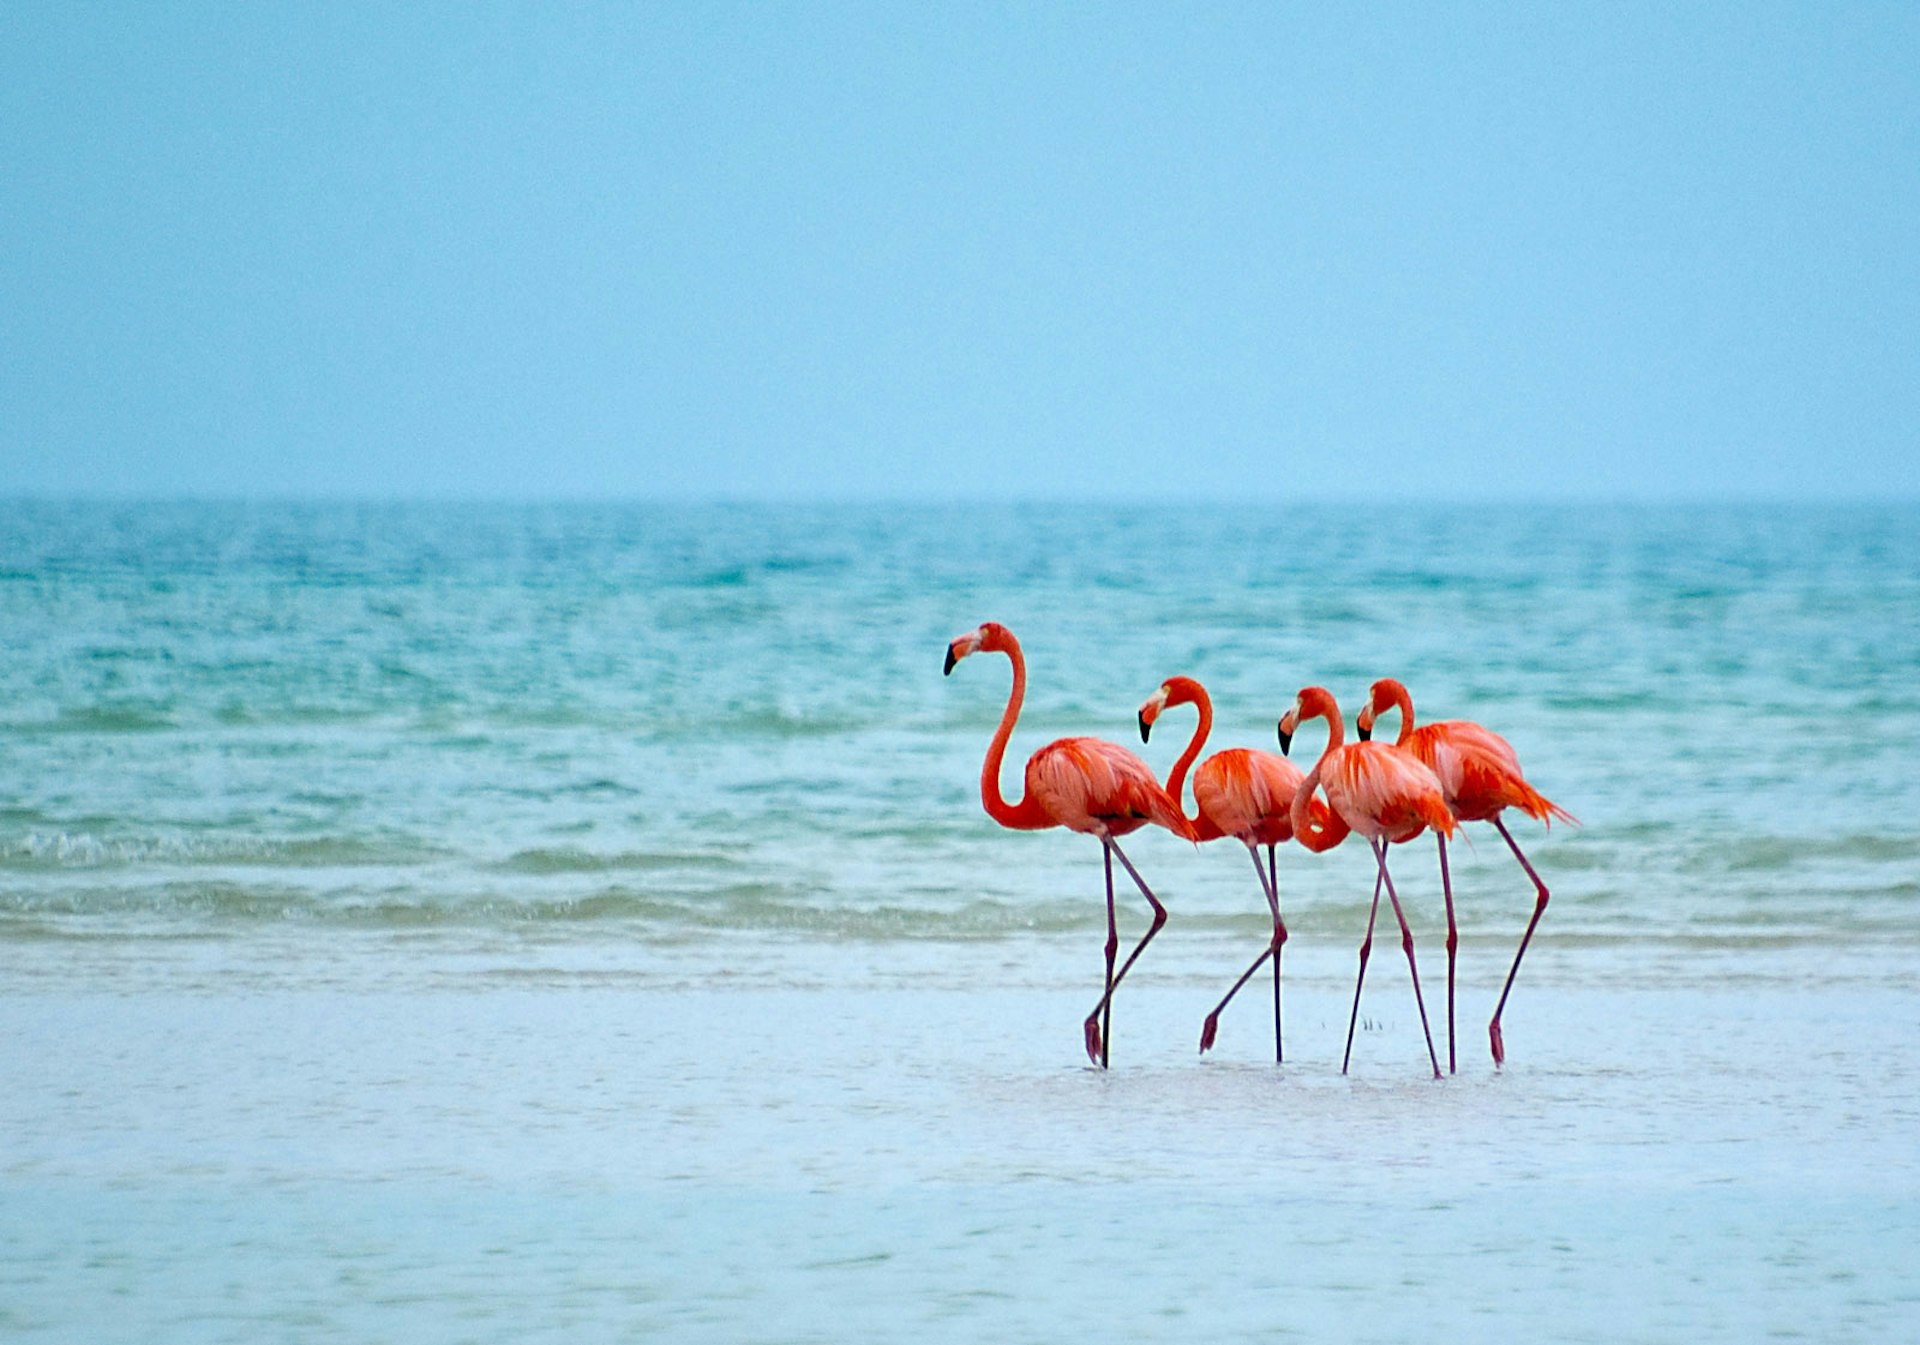 Four pink flamingos walk through the shallow water with ocean behind them